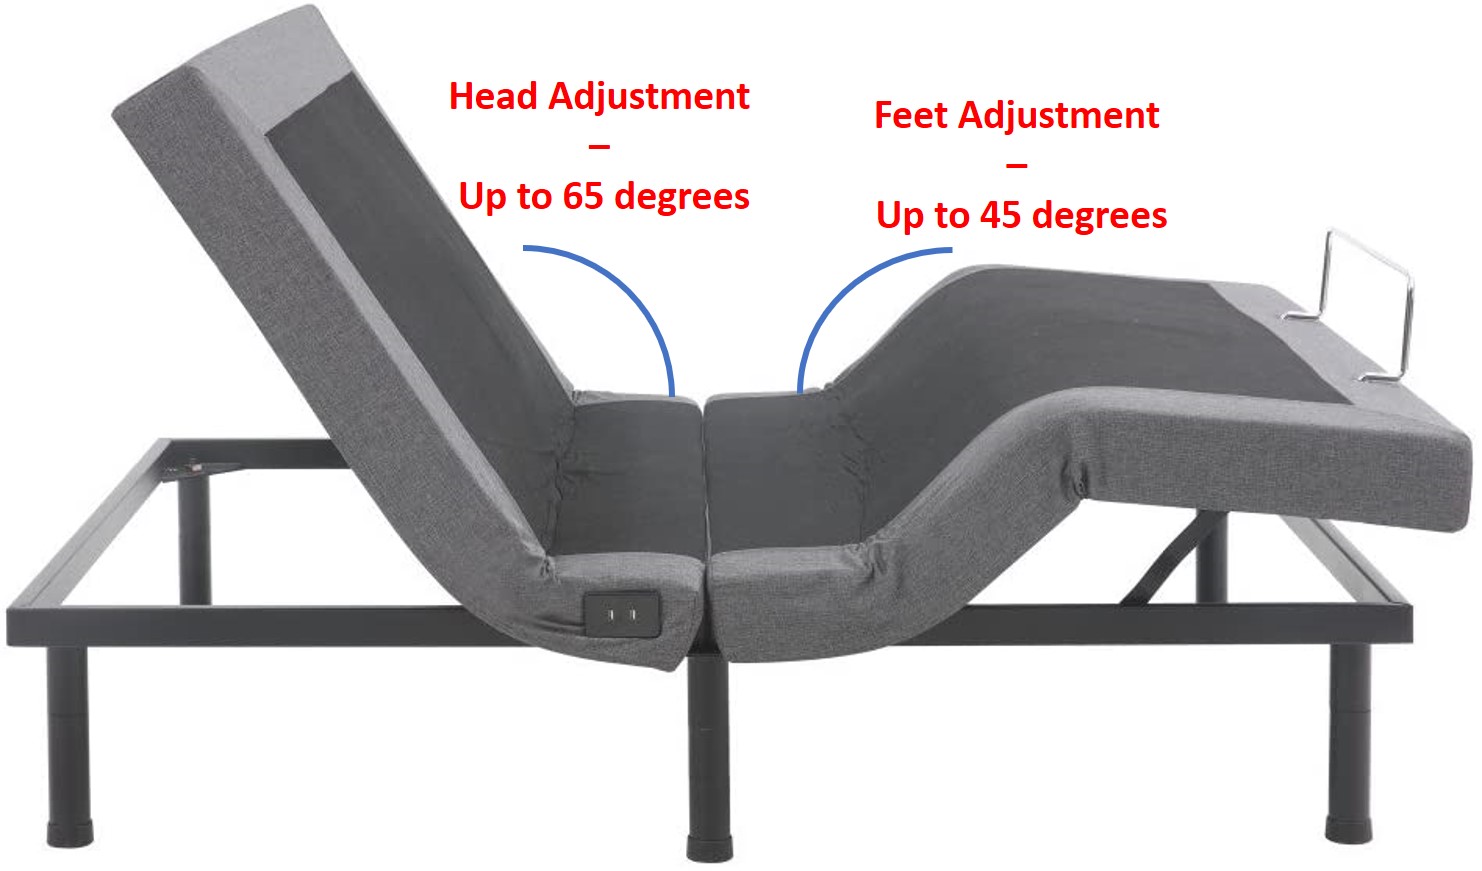 Vibe Adjustable Bed Review - Adjustments